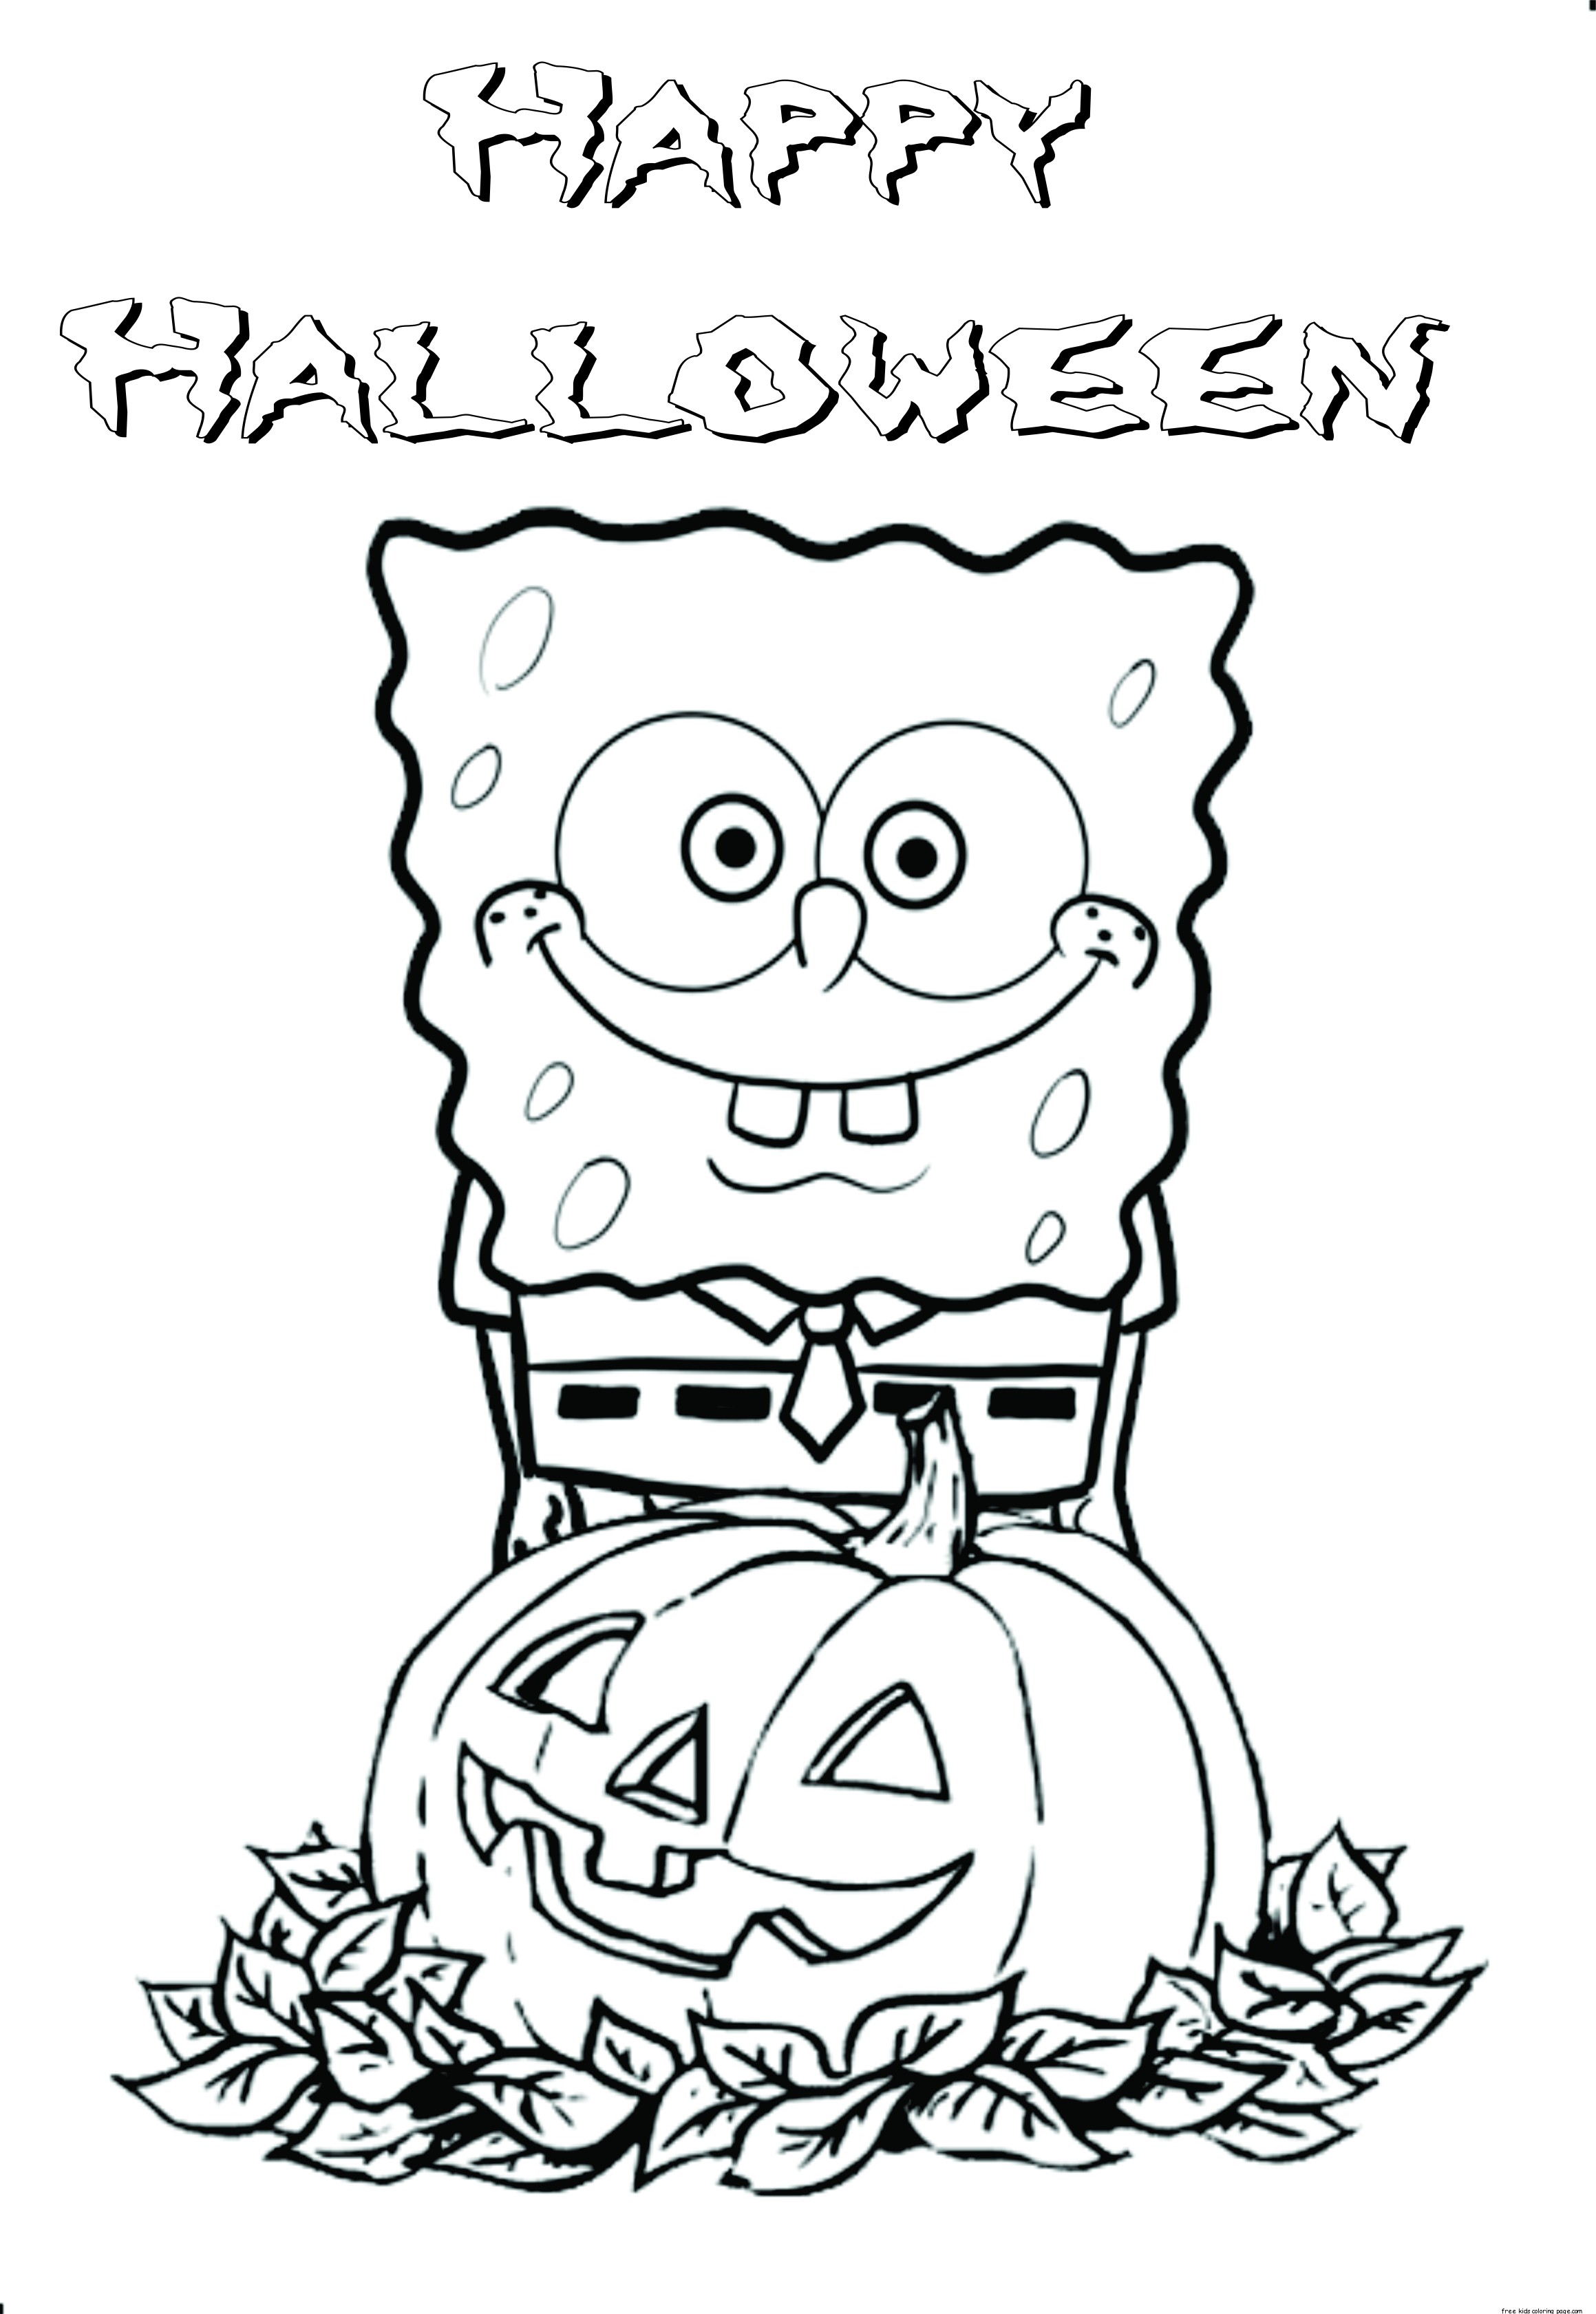 download-coloring-pages-for-kids-to-print-out-pics-colorist